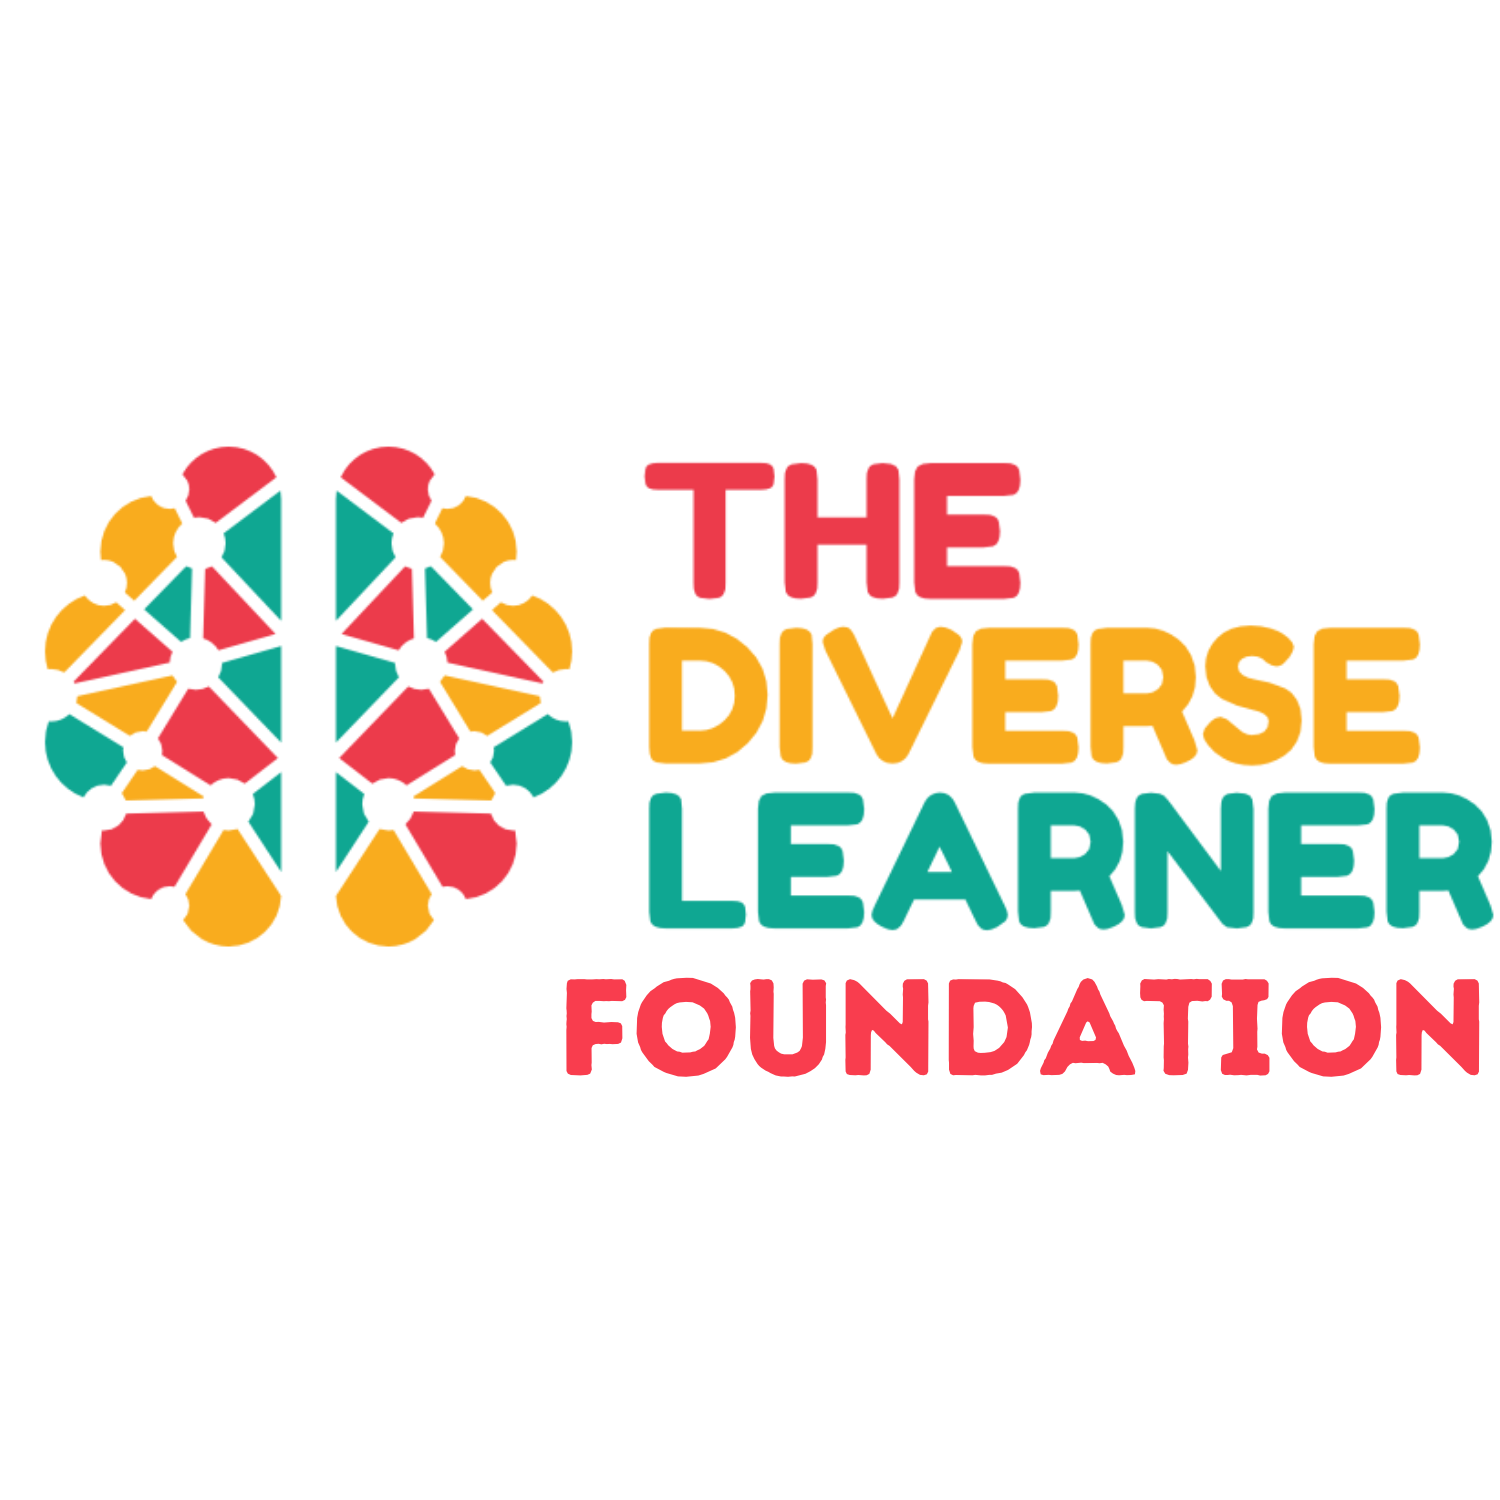 The Diverse Learner Foundation